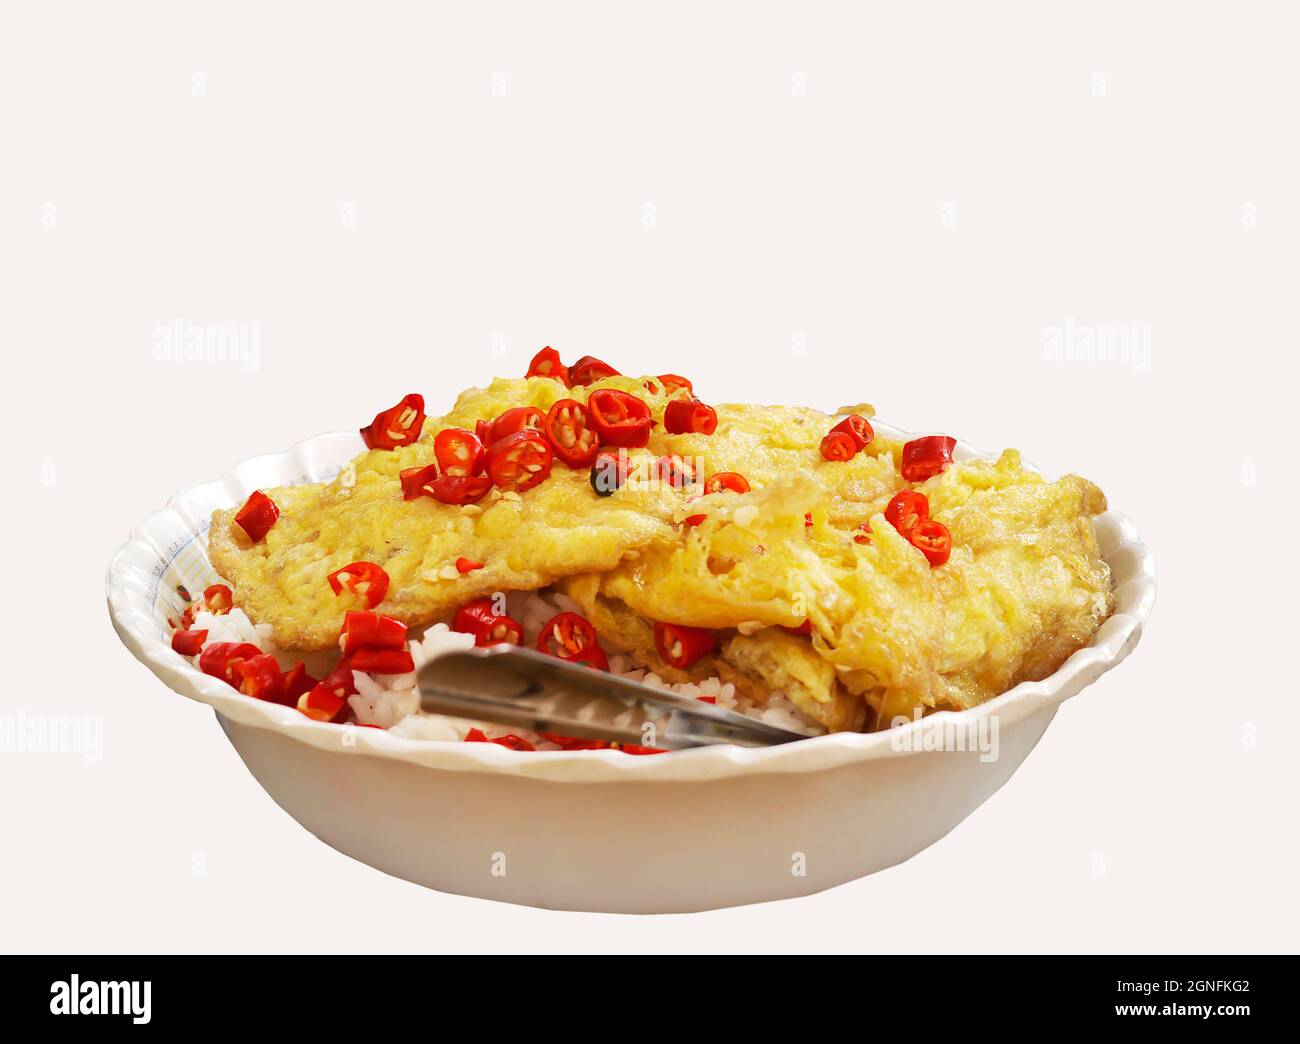 delicious quick meal local thai style deep fried omelette with load of red chilli on rice isolated die cut white background Stock Photo